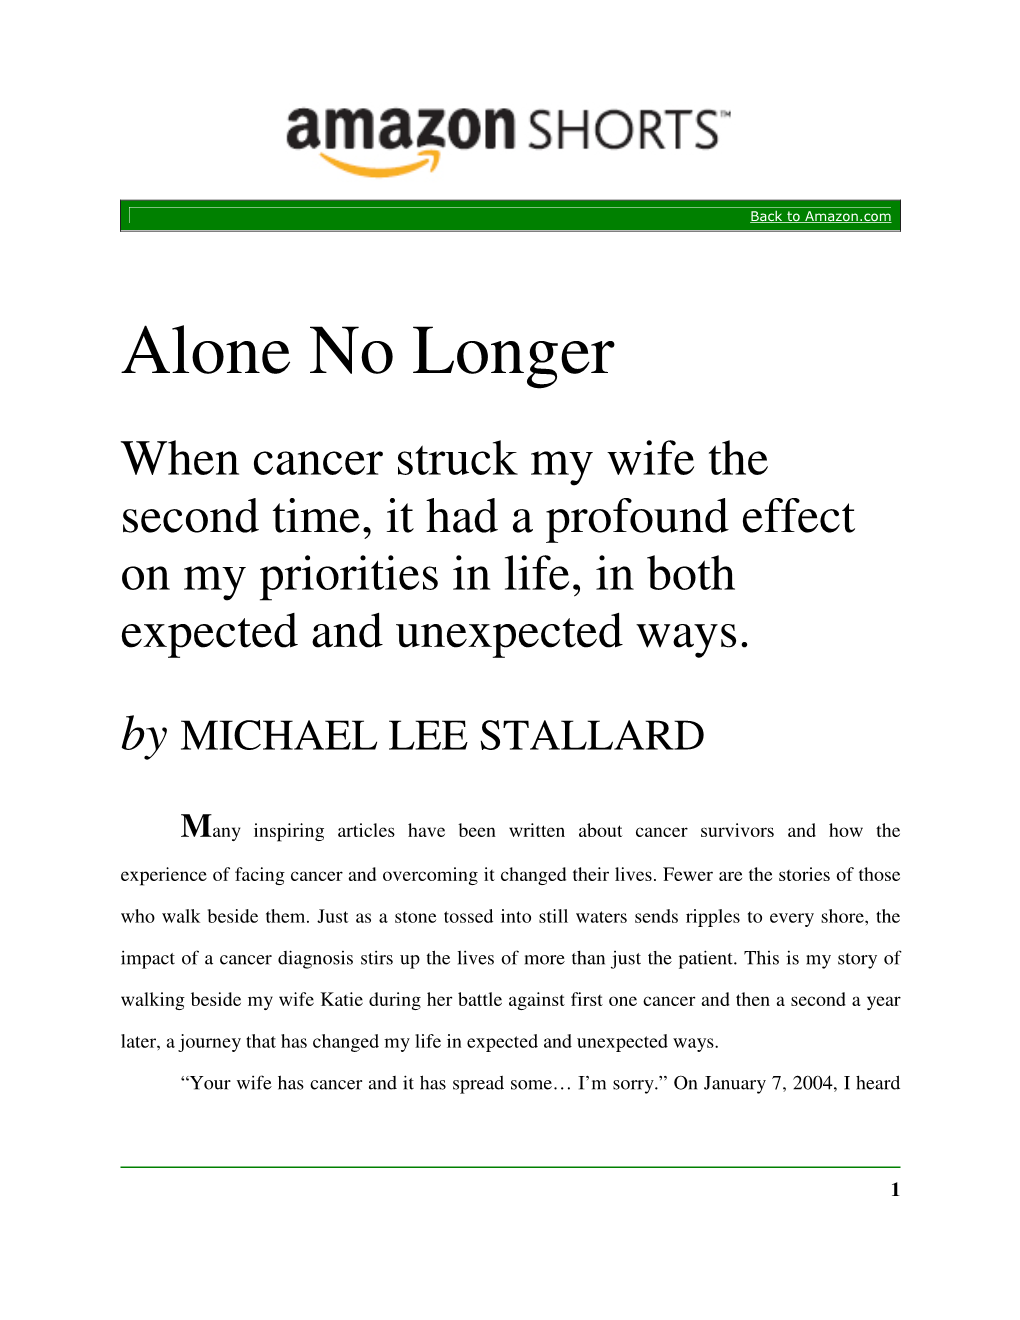 Alone No Longer When Cancer Struck My Wife the Second Time, It Had a Profound Effect on My Priorities in Life, in Both Expected and Unexpected Ways